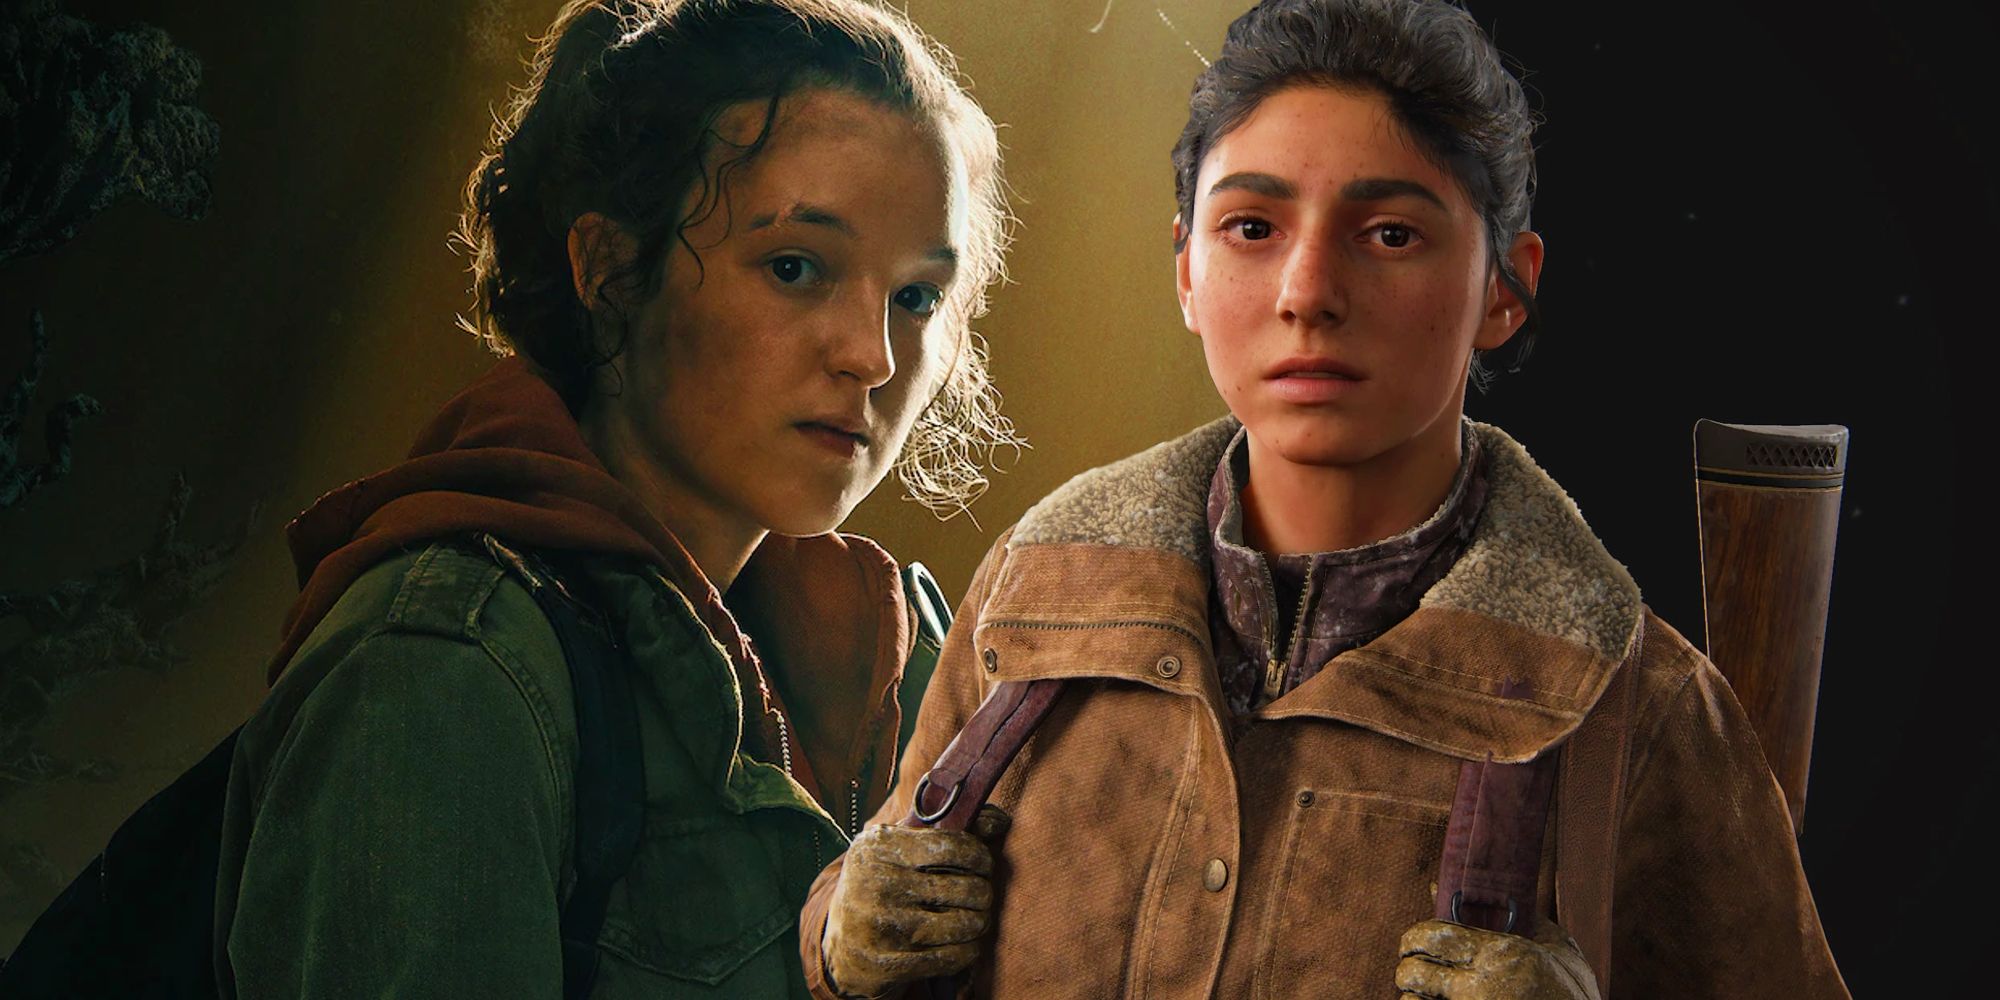 Bella Ramsey as Ellie in HBO's official Last of Us character poster next to the character model of Dina from The Last of Us Part II